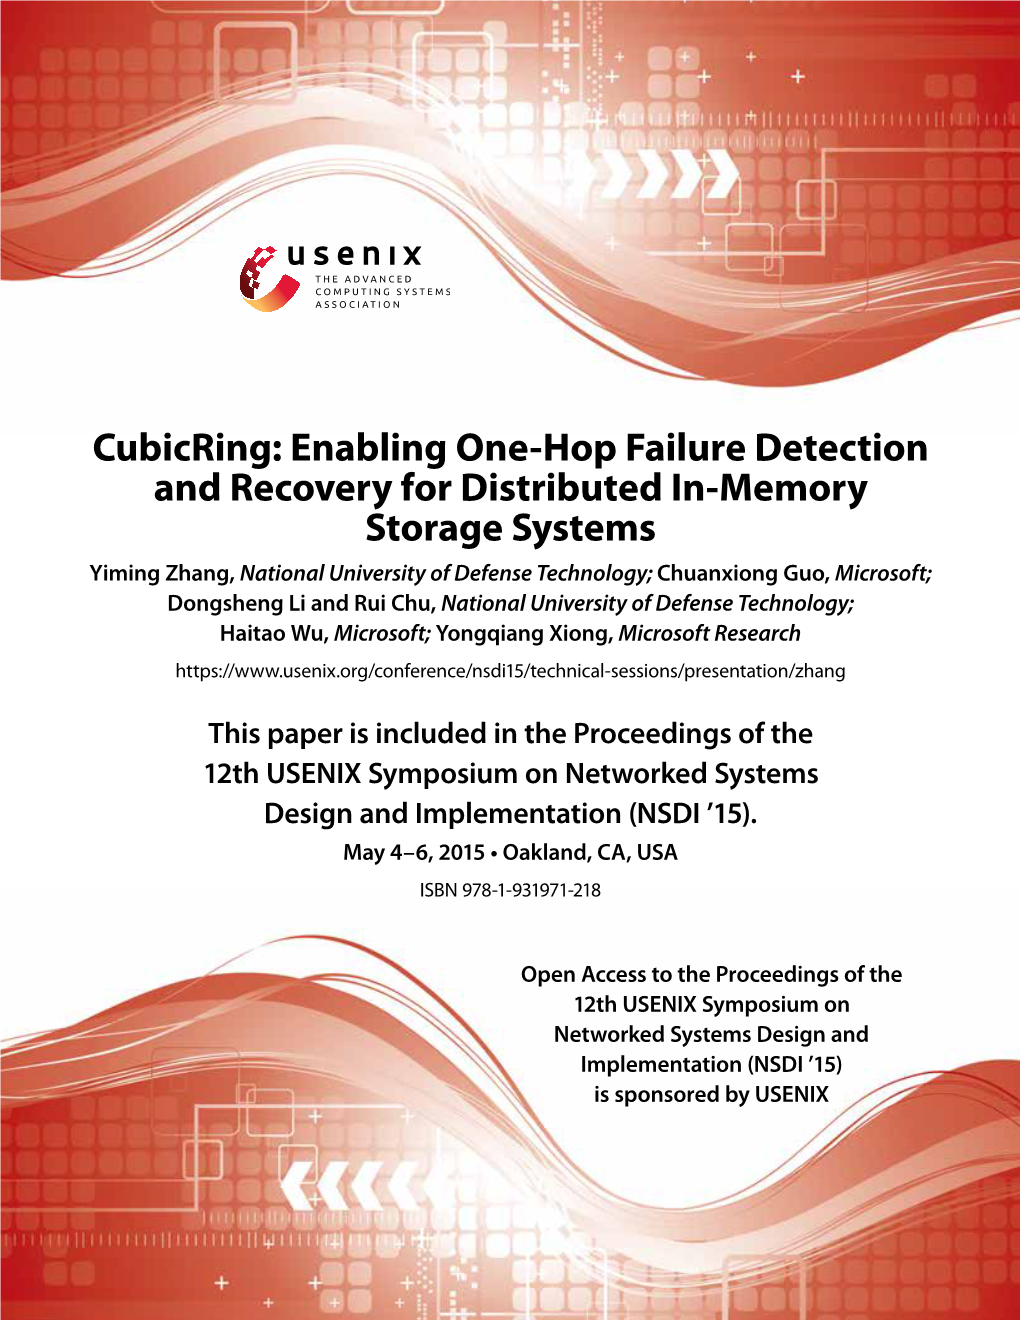 Cubicring: Enabling One-Hop Failure Detection and Recovery for Distributed In-Memory Storage Systems